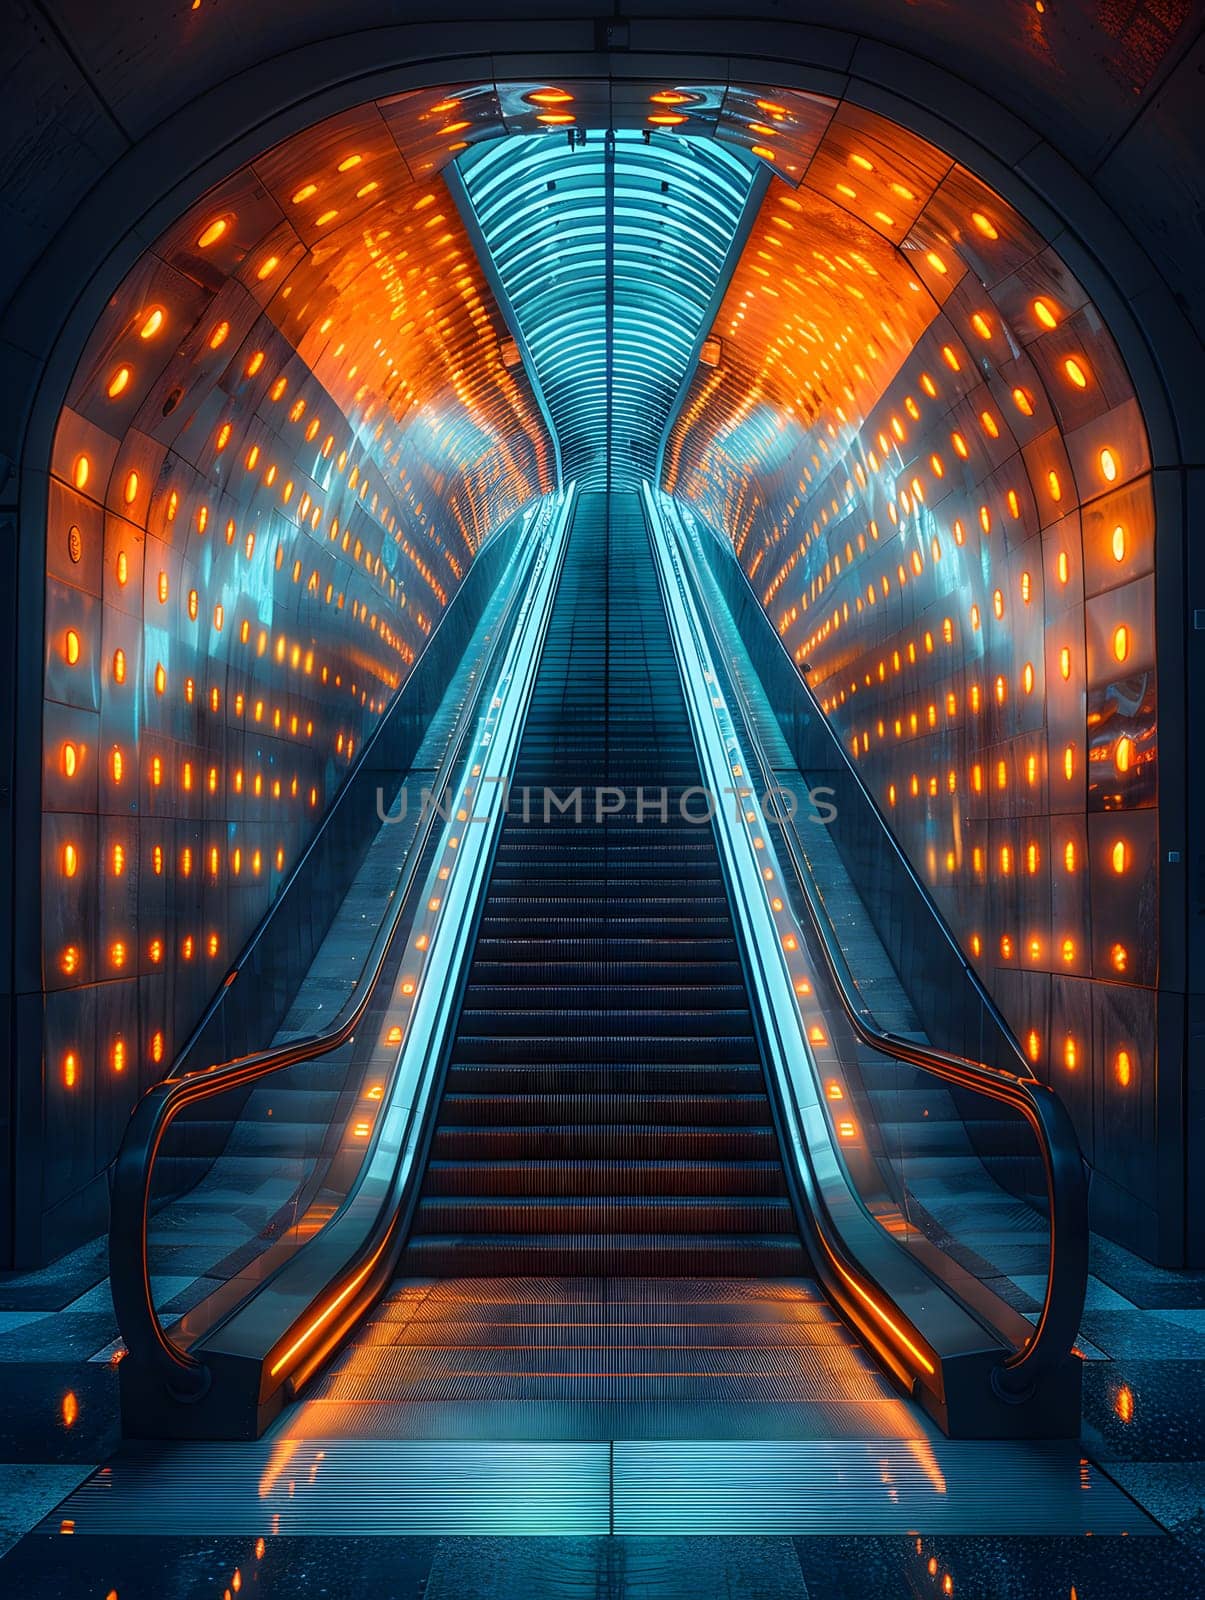 An automotive lighting escalator in a city tunnel, featuring a symmetrical design with tints and shades creating an artistic triangle effect, powered by electricity